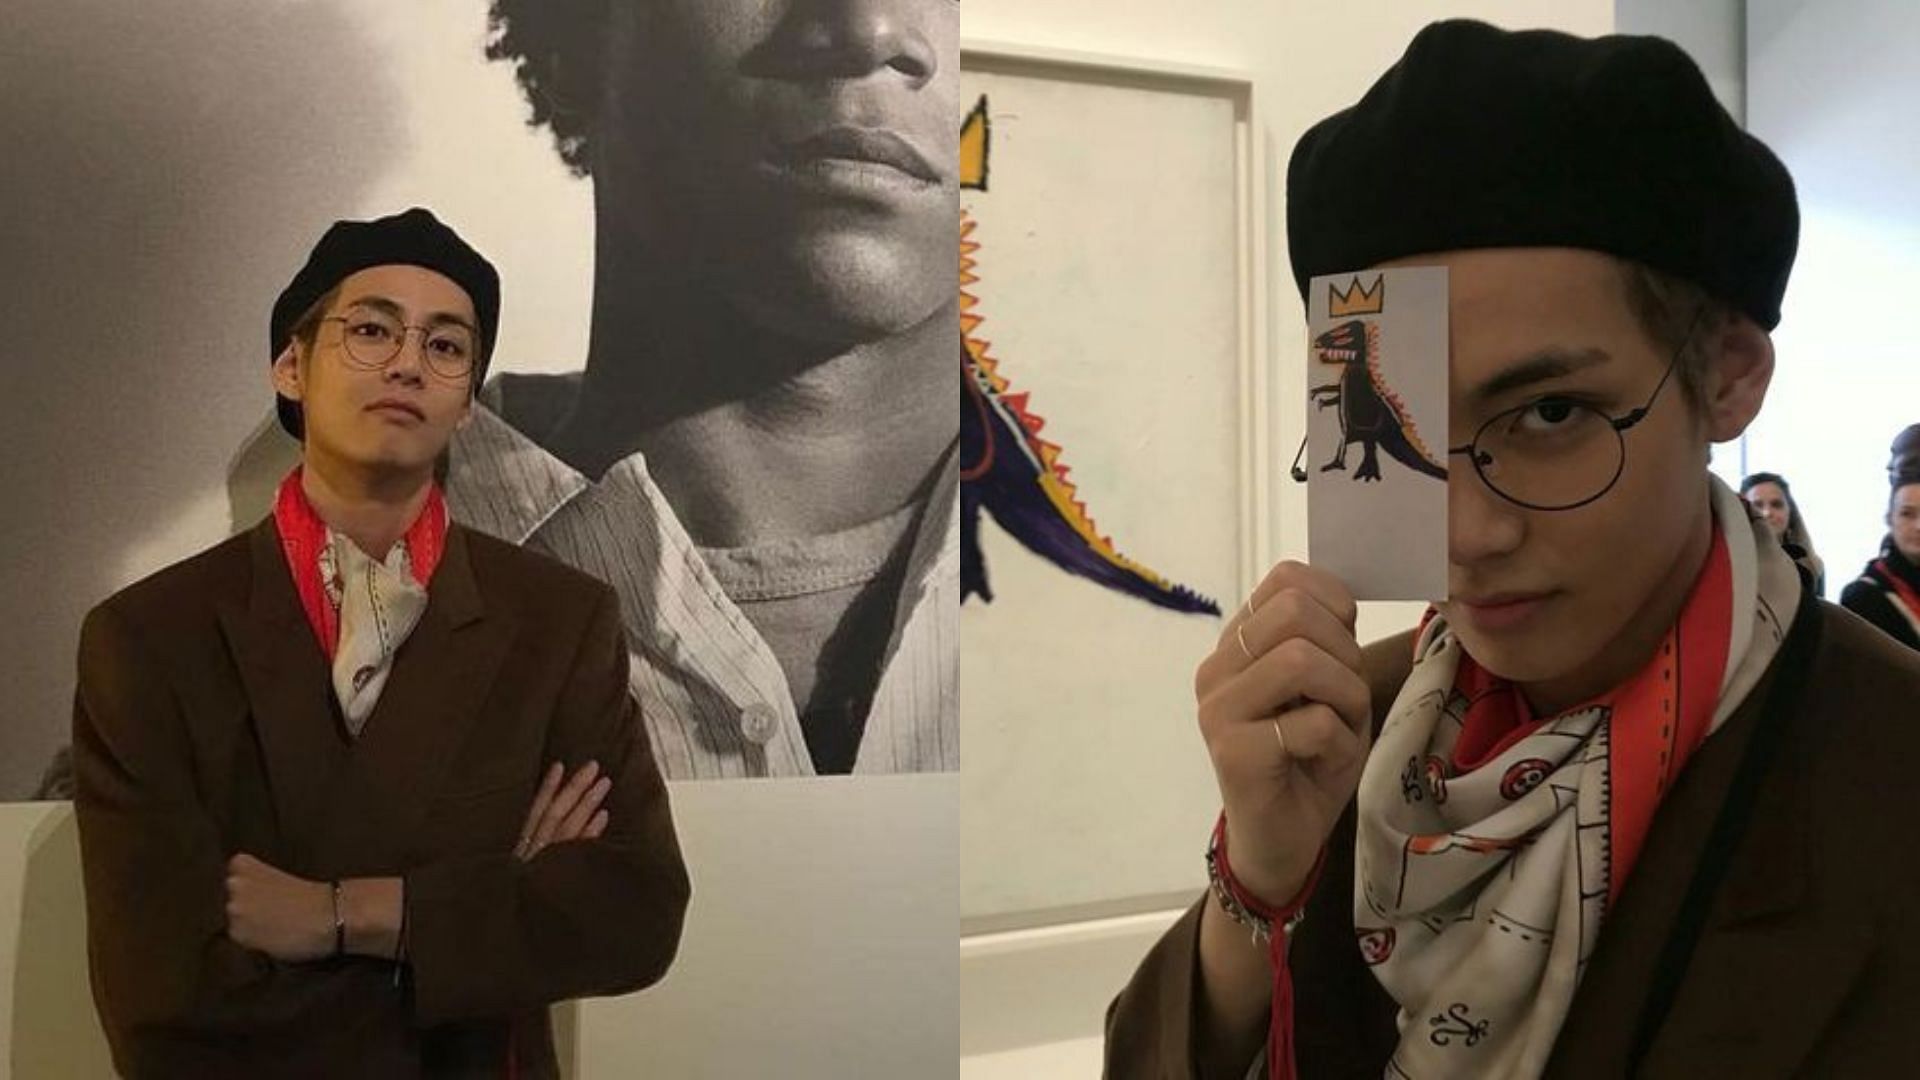 V looking mysteriously classy in his retro scarf as he walks through the art museum (Image via Twitter/@BTS_twt)